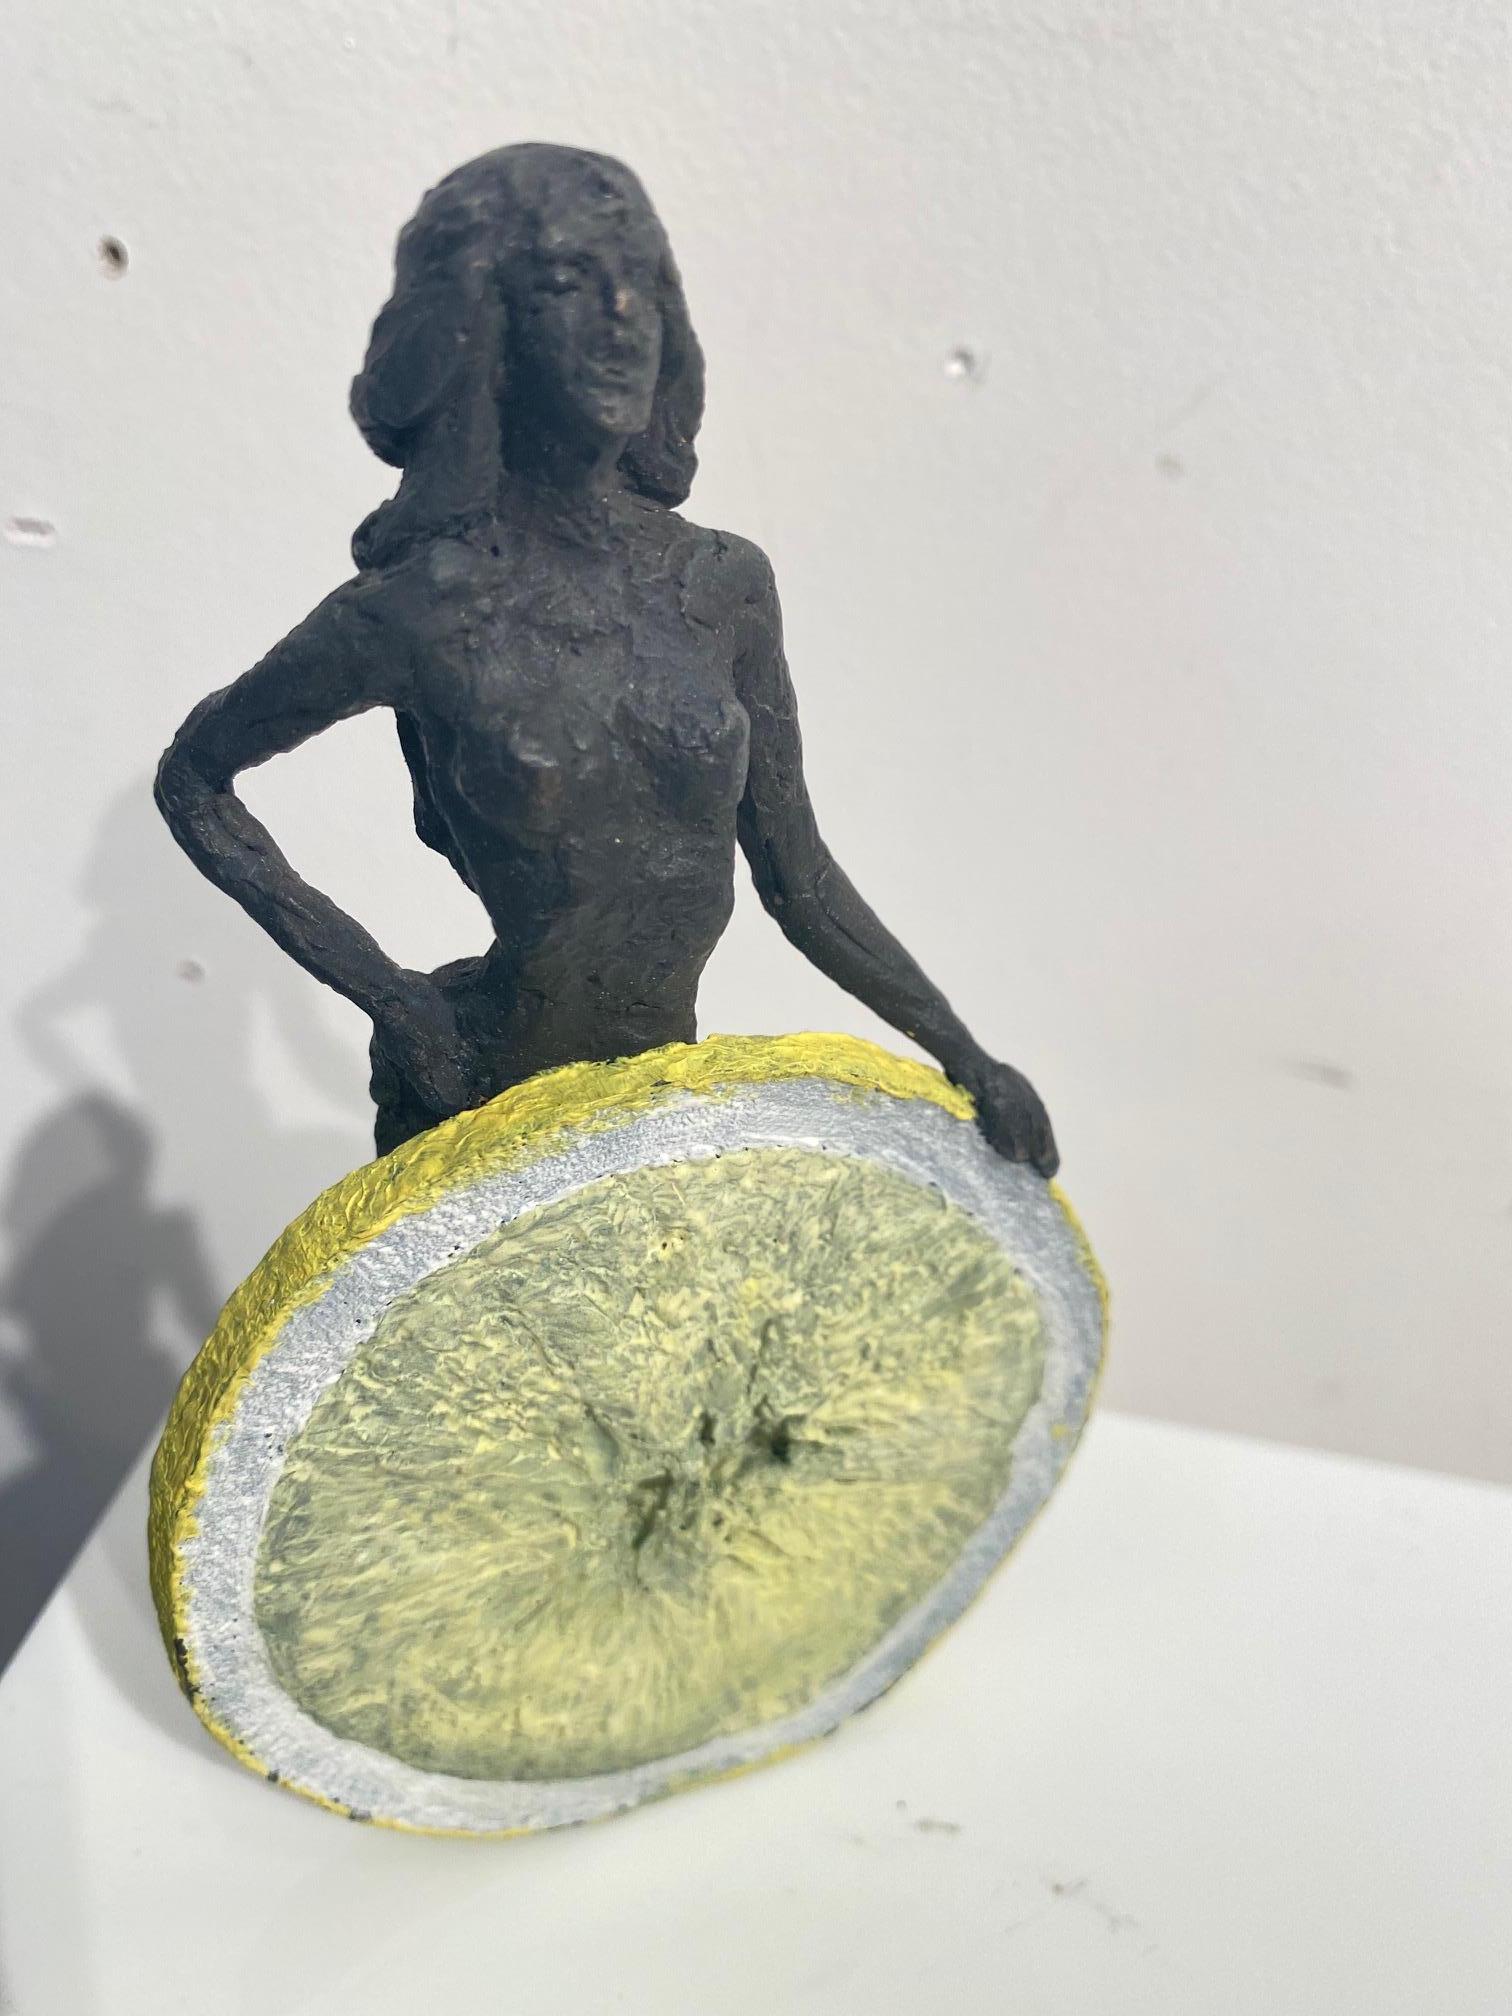 "The Beautiful Sparkle" is a small free-standing bronze sculpture of a standing nude female behind a yellow lemon. Edition 18, signed, numbered and dated on the bottom. 

The sculptress Susanne Kraisser is to be considered as part of the great